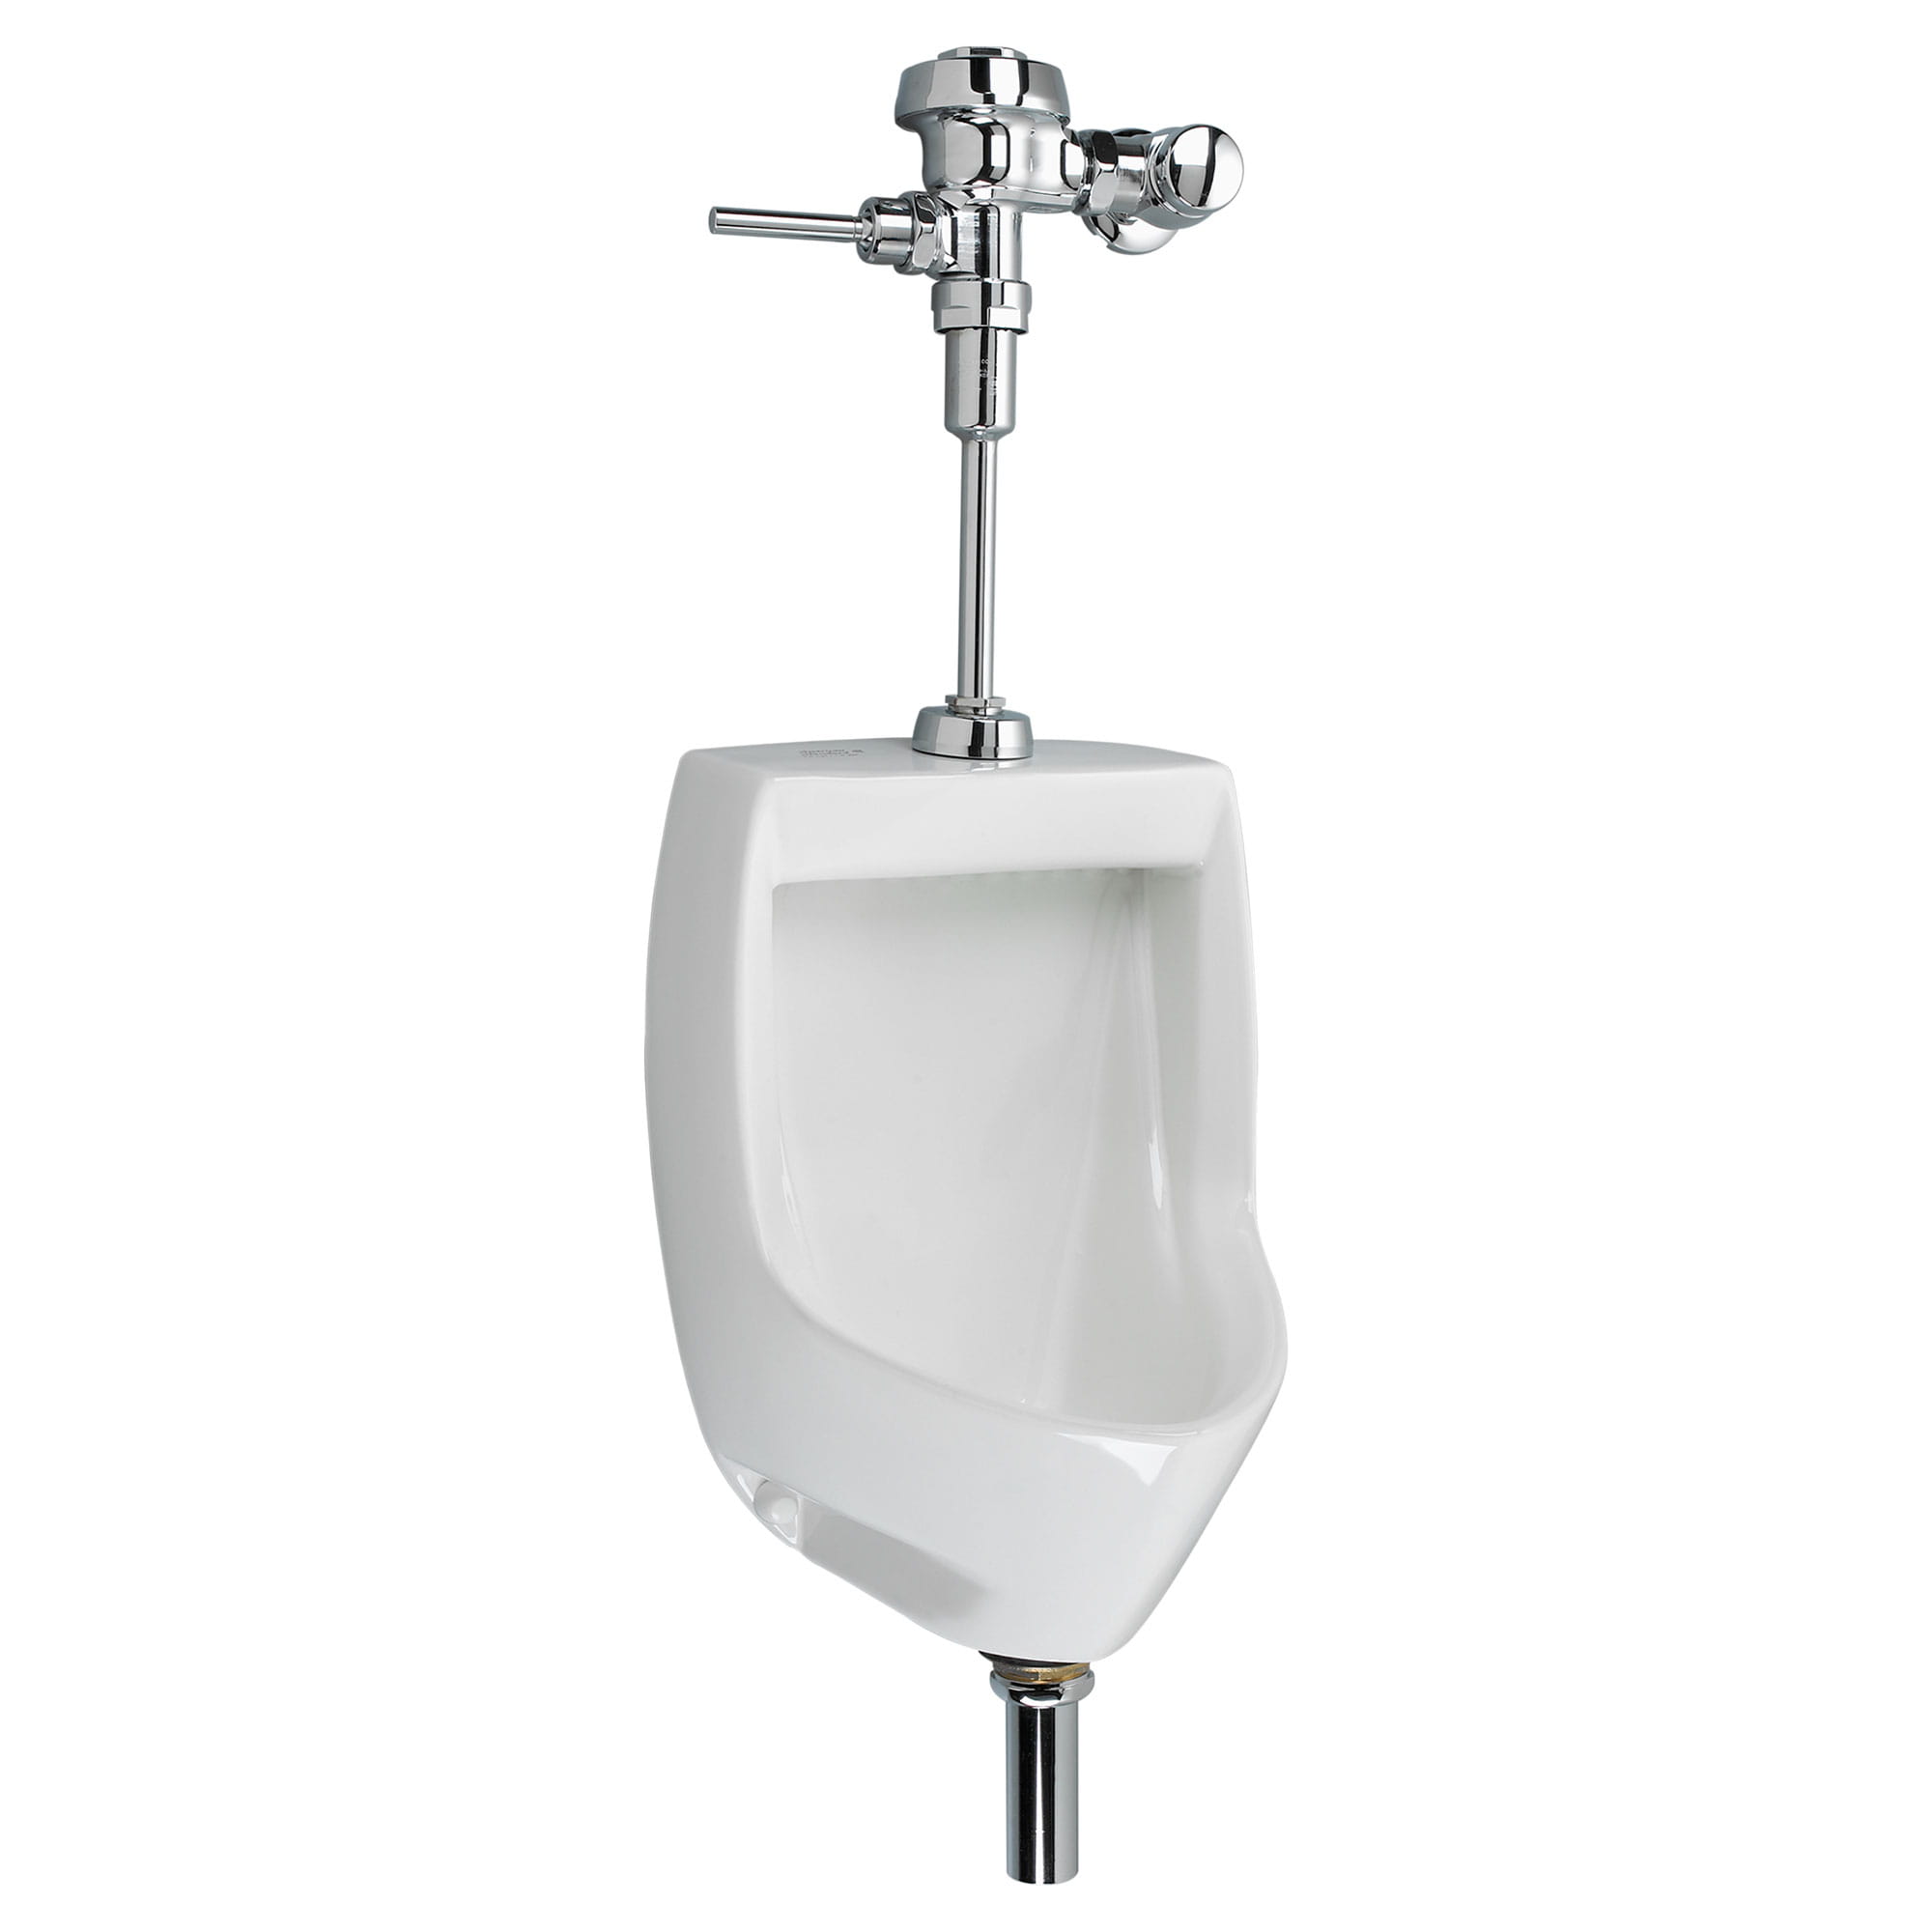 White American Standard 6550001.020 6550001.02 Siphon Jet Top Spud Urinal 2 in 21-1/2 in H W X 14-5/16 in D 3/4 in 